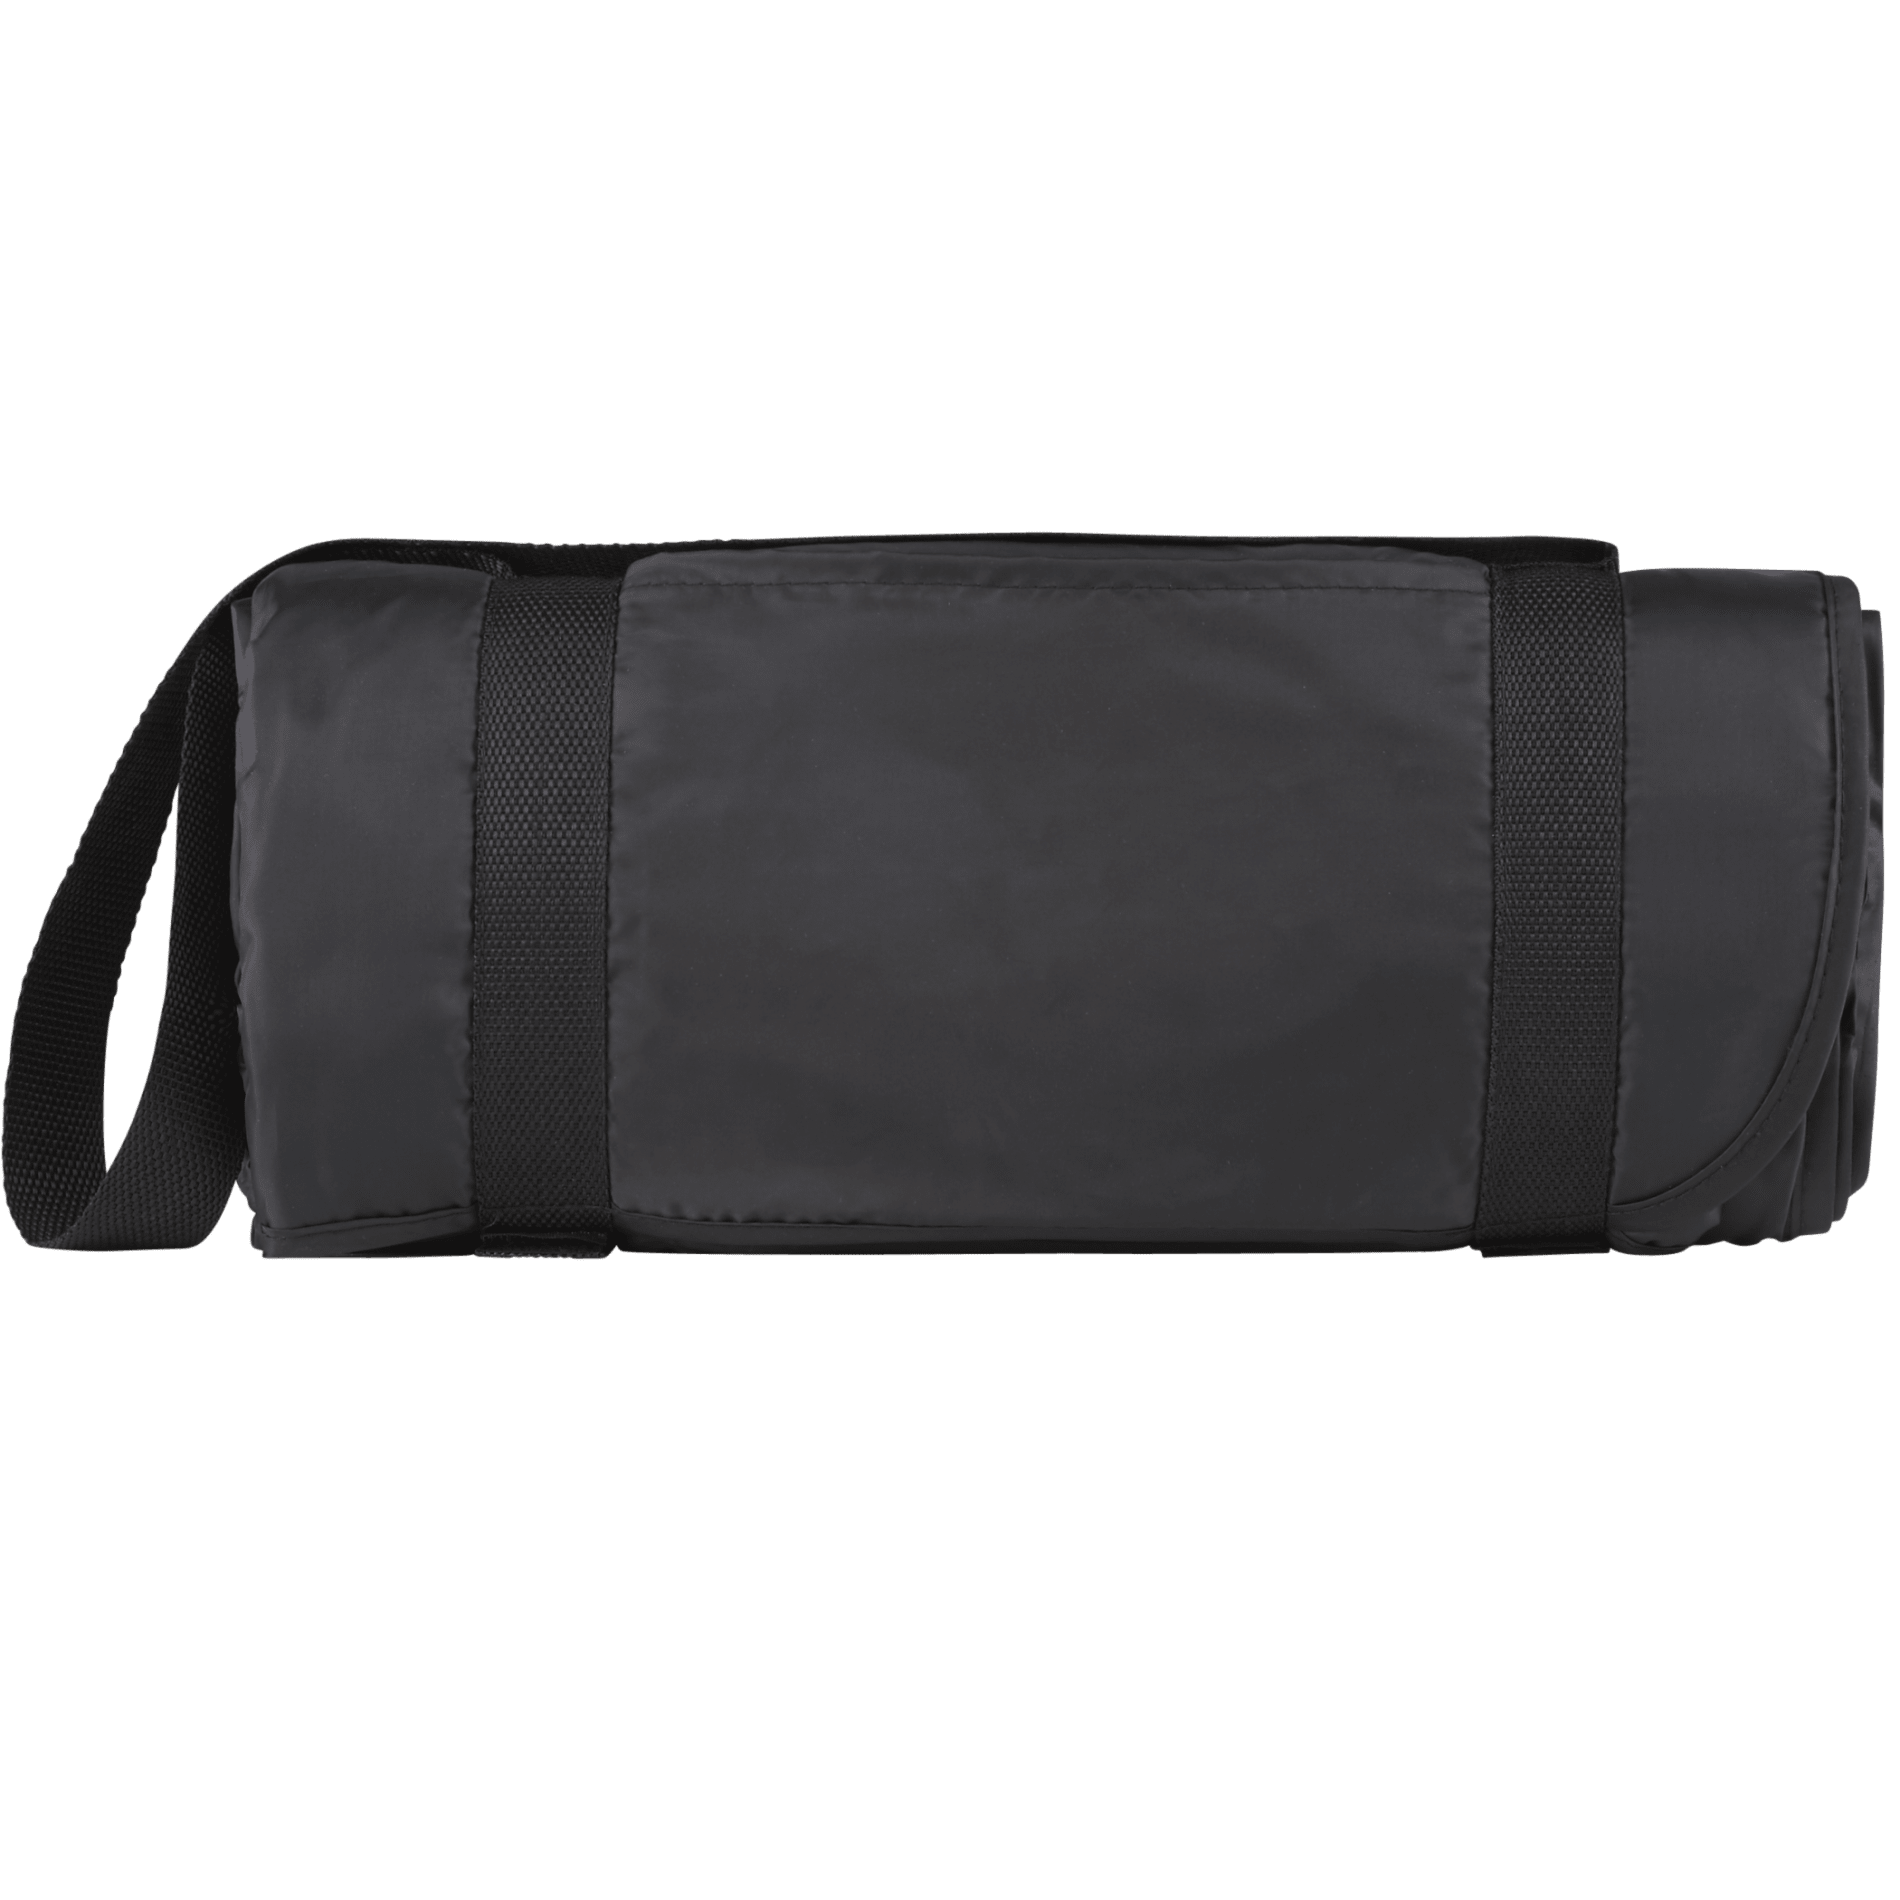 Bullet SM-7724 - Roll up Picnic Blanket with Carrying Strap